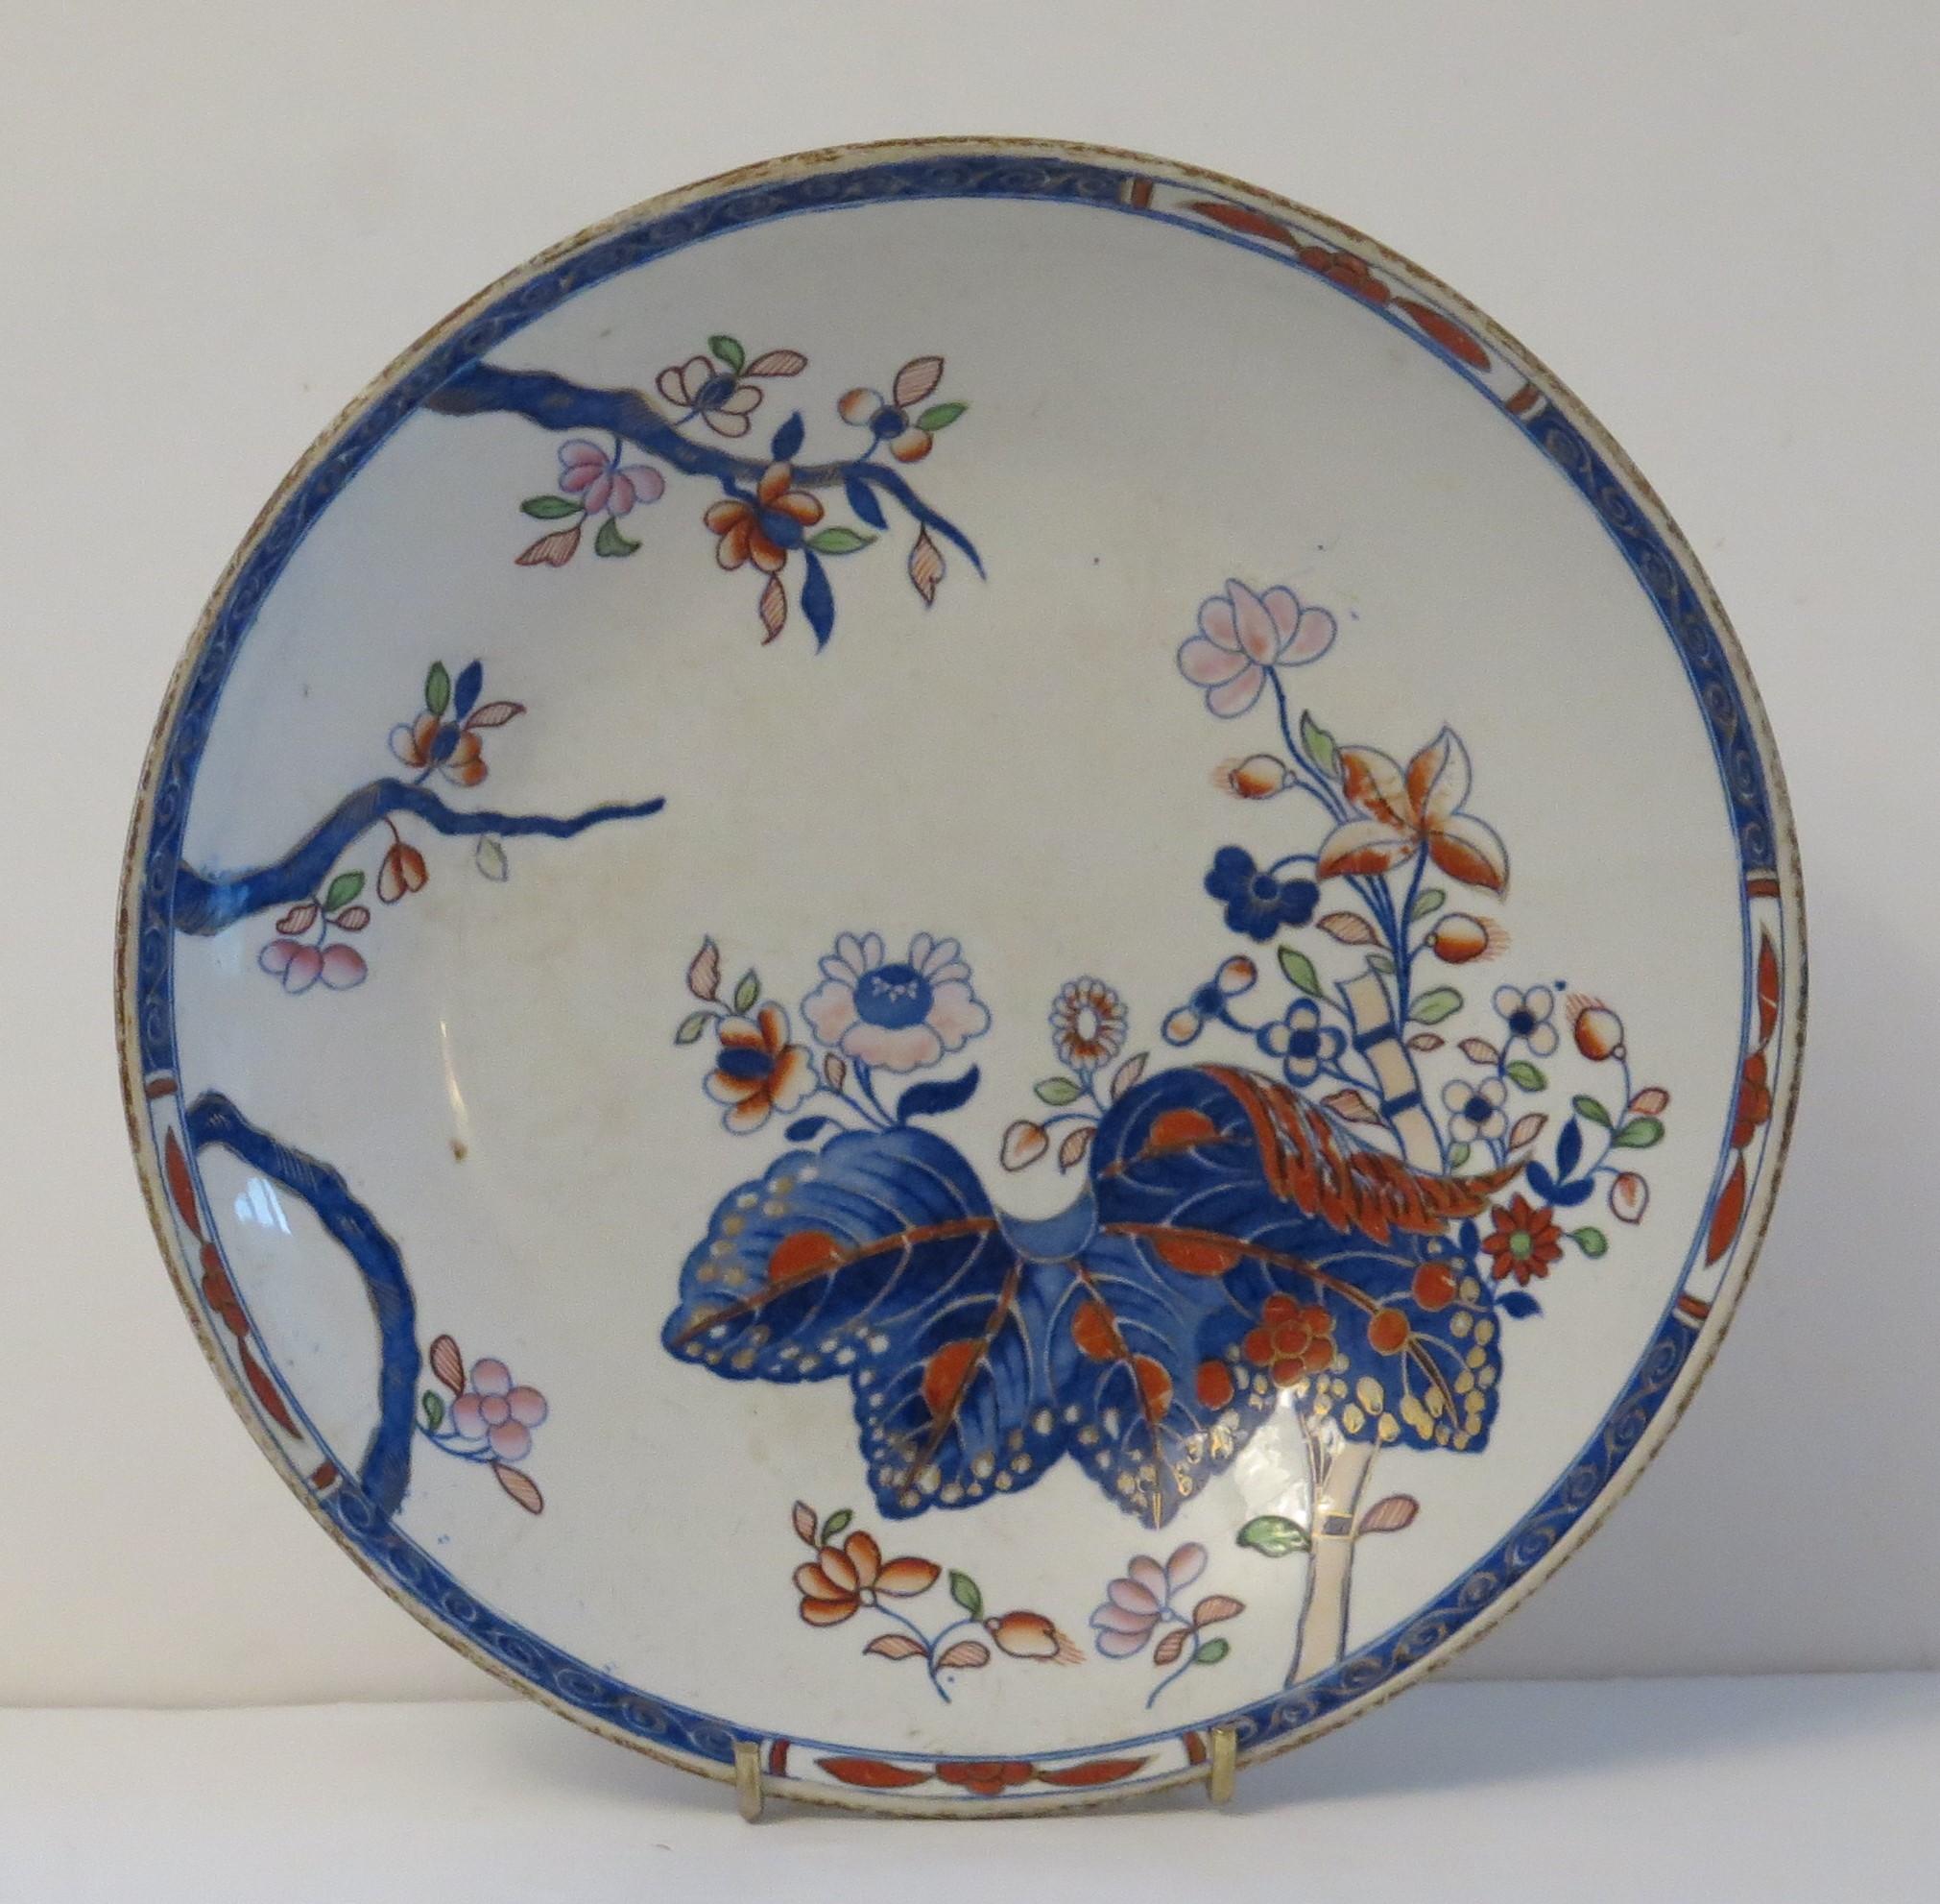 This is a very good stone China (Ironstone) large Saucer Dish or Deep Plate, hand painted in the tobacco leaf pattern, number 2061, made by the Spode factory in the early 19th century, English Georgian period, circa 1820.

The dish or plate is made